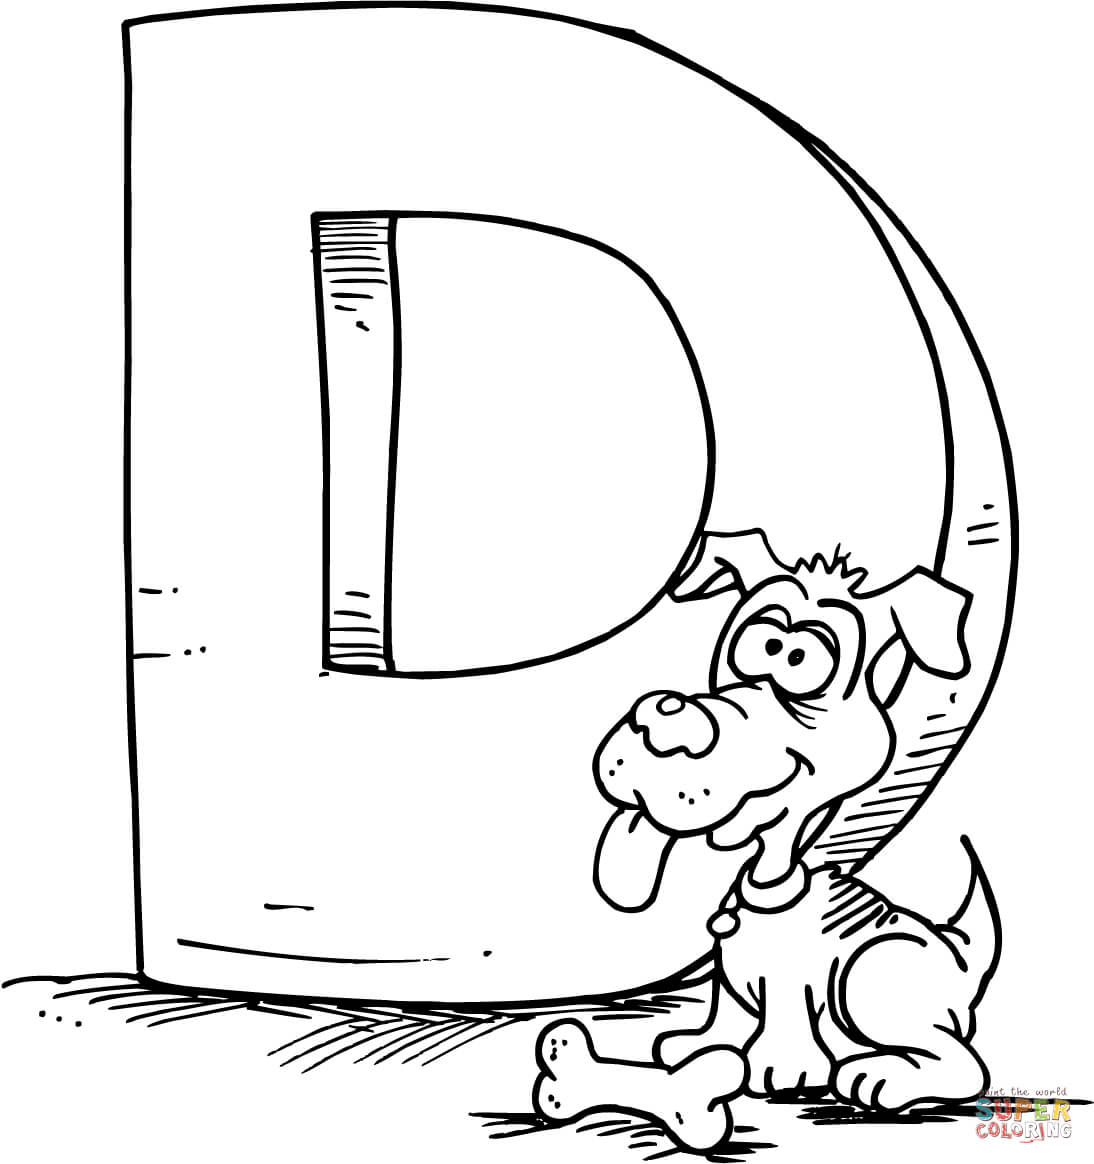 Letter D is for Dog coloring page | Free Printable Coloring Pages